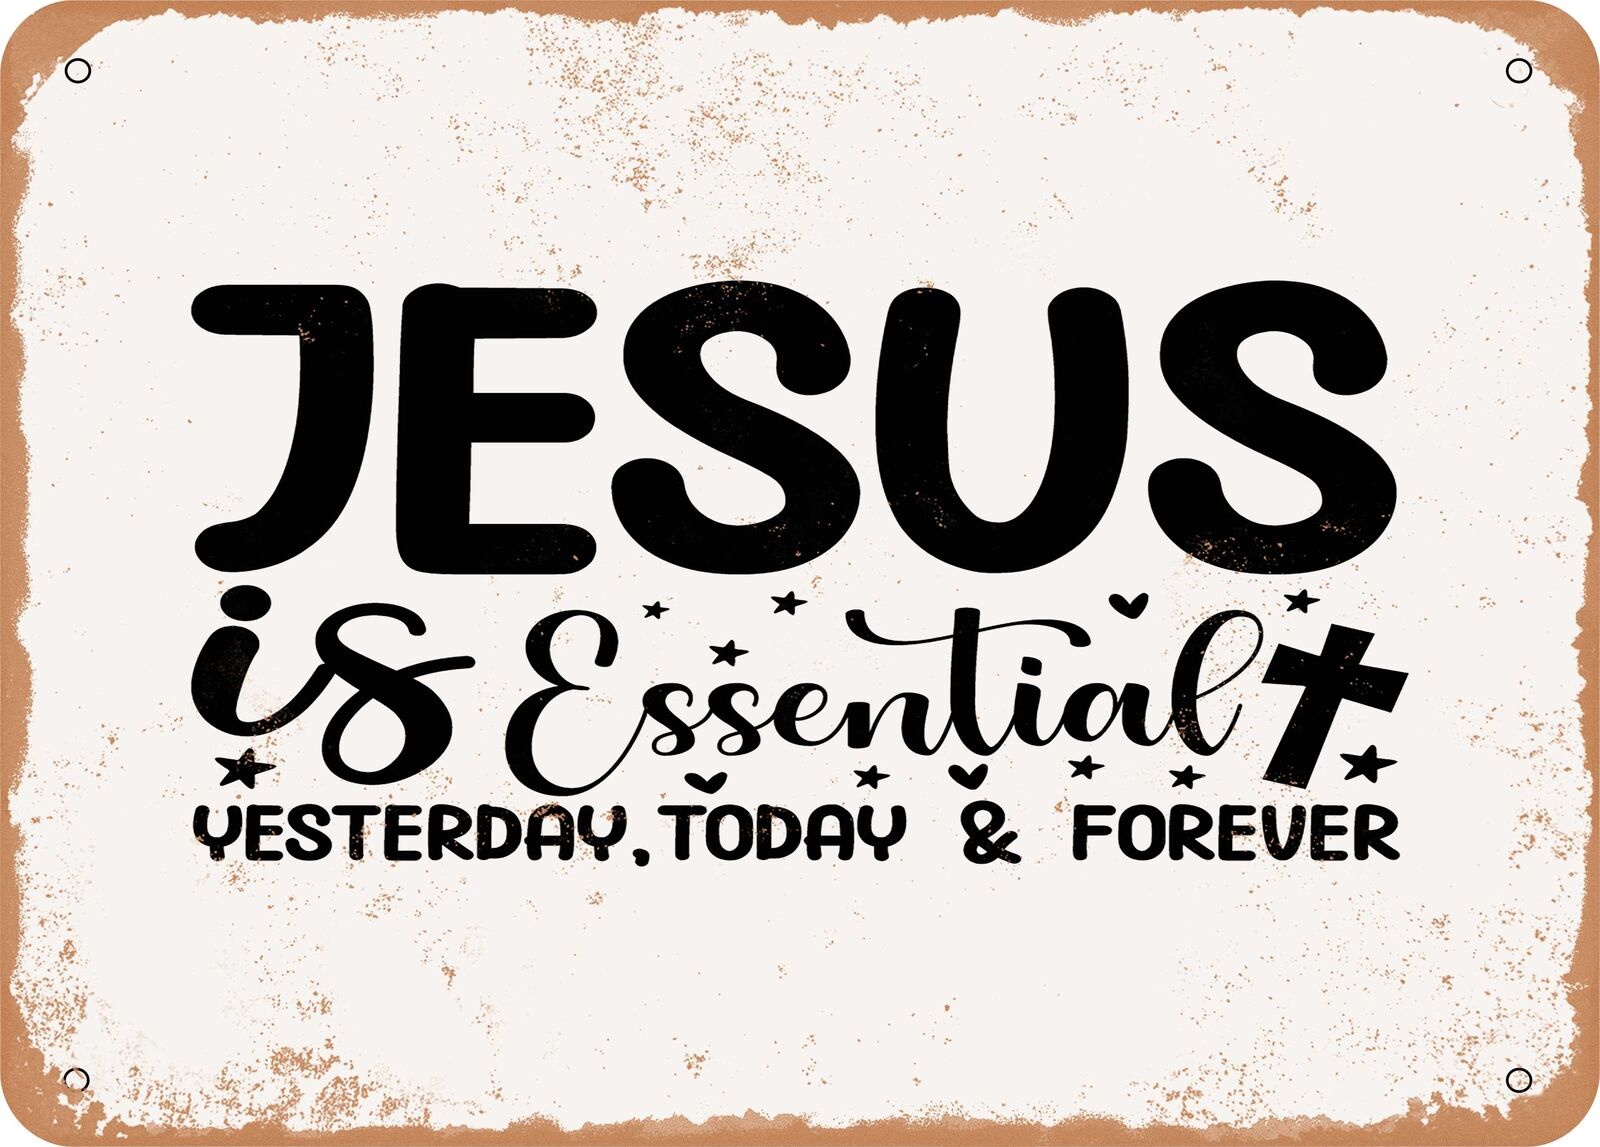 Metal Sign - Jesus is Essential Yesterday today and Forever - Vintage Look Sign